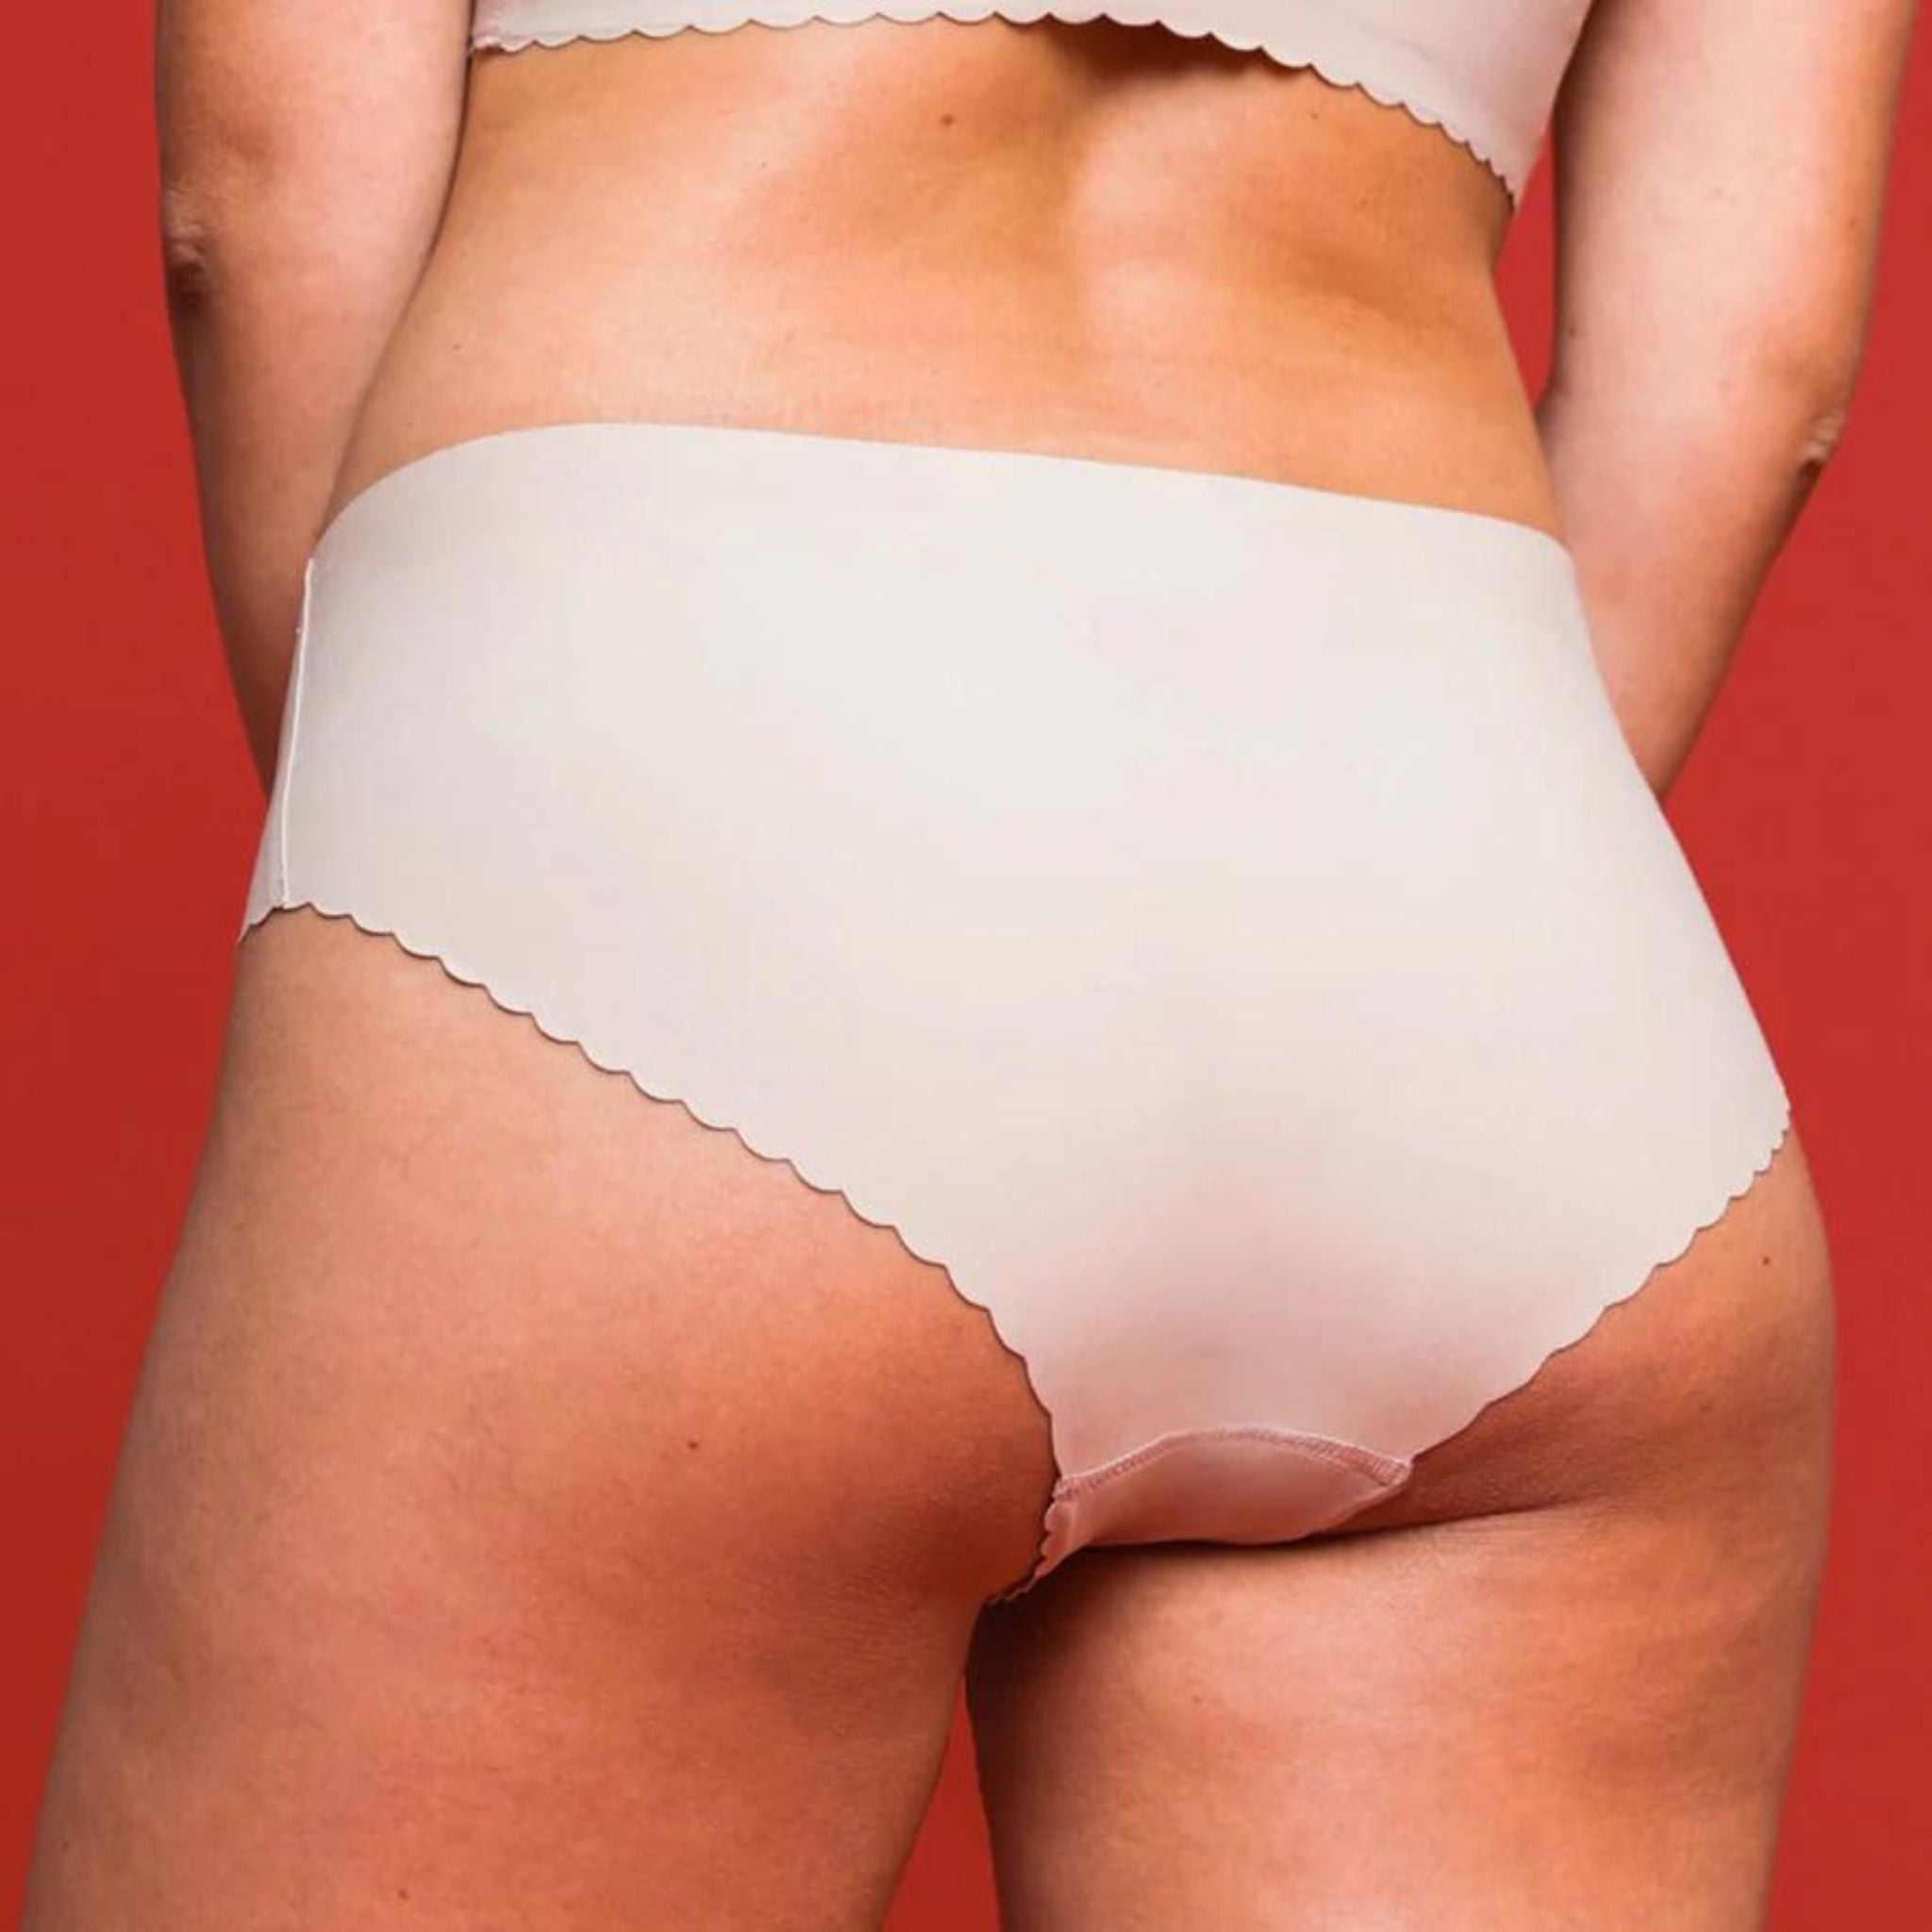 The Everyday Undie provides invisible protection and is made with breathable microfiber to eliminate panty lines. Created with delicate, scalloped edges, these undies are so comfy they feel like a second skin!